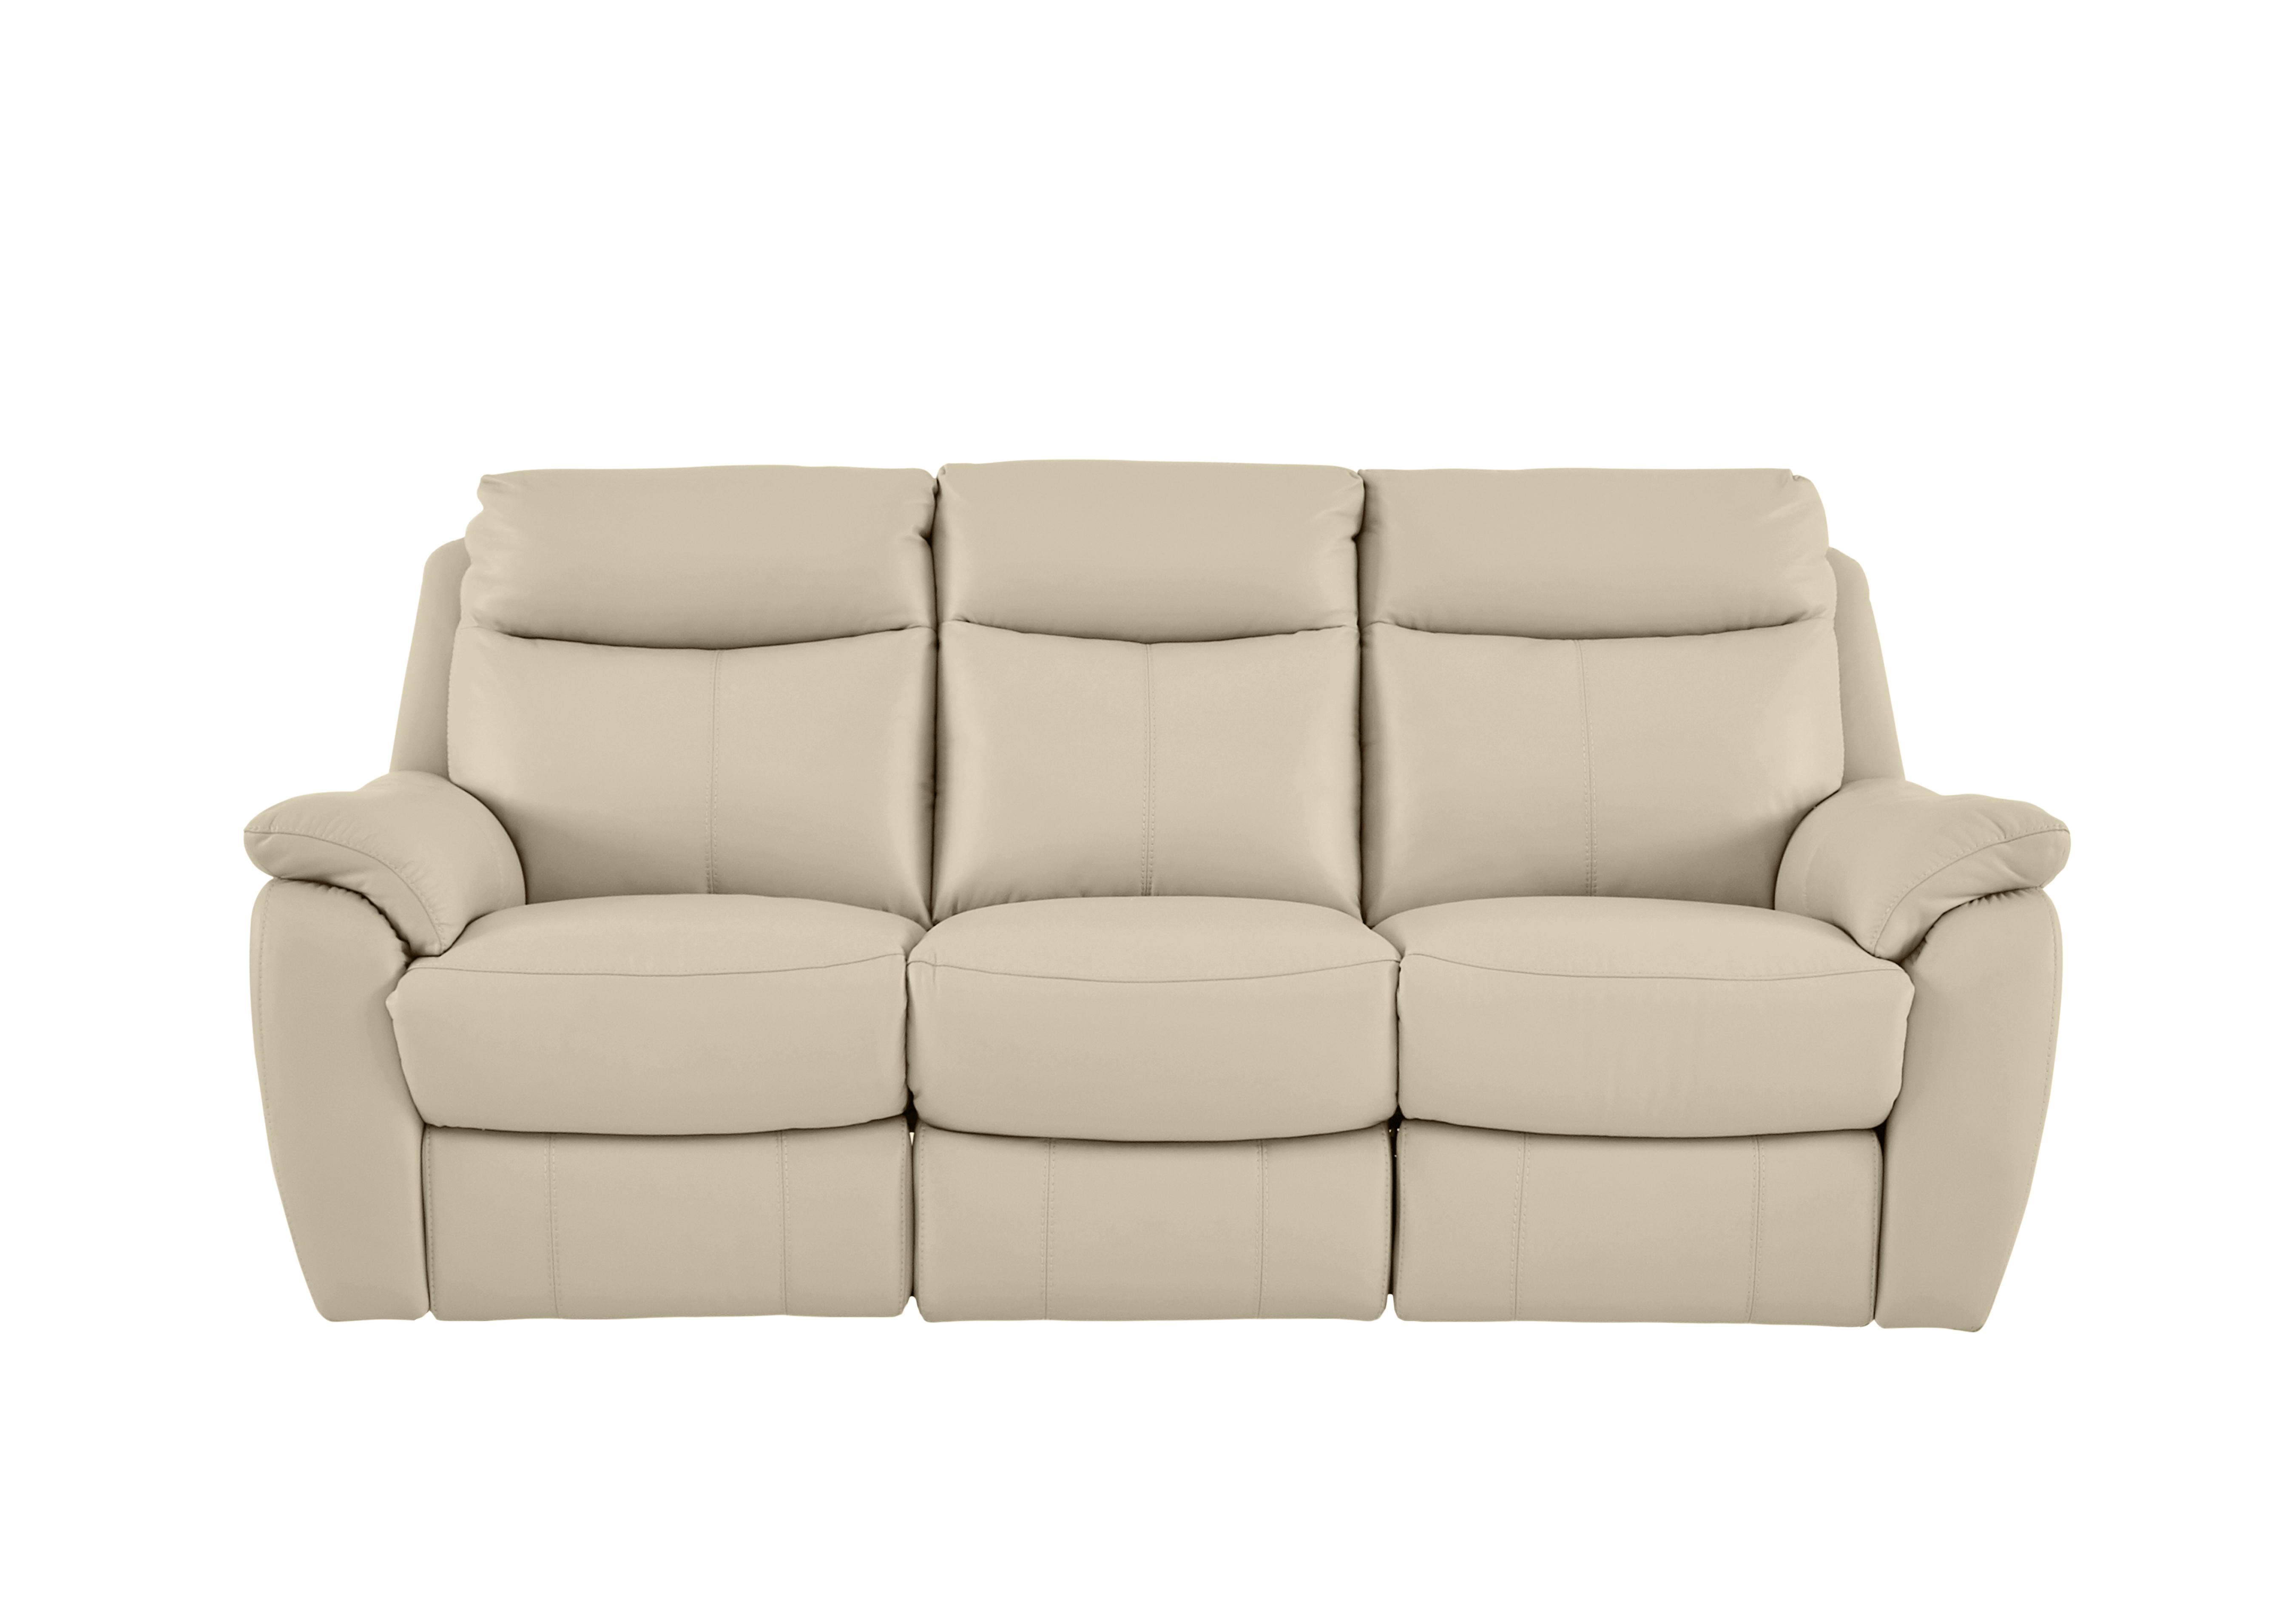 Snug 3 Seater Leather Sofa in Bv-862c Bisque on Furniture Village